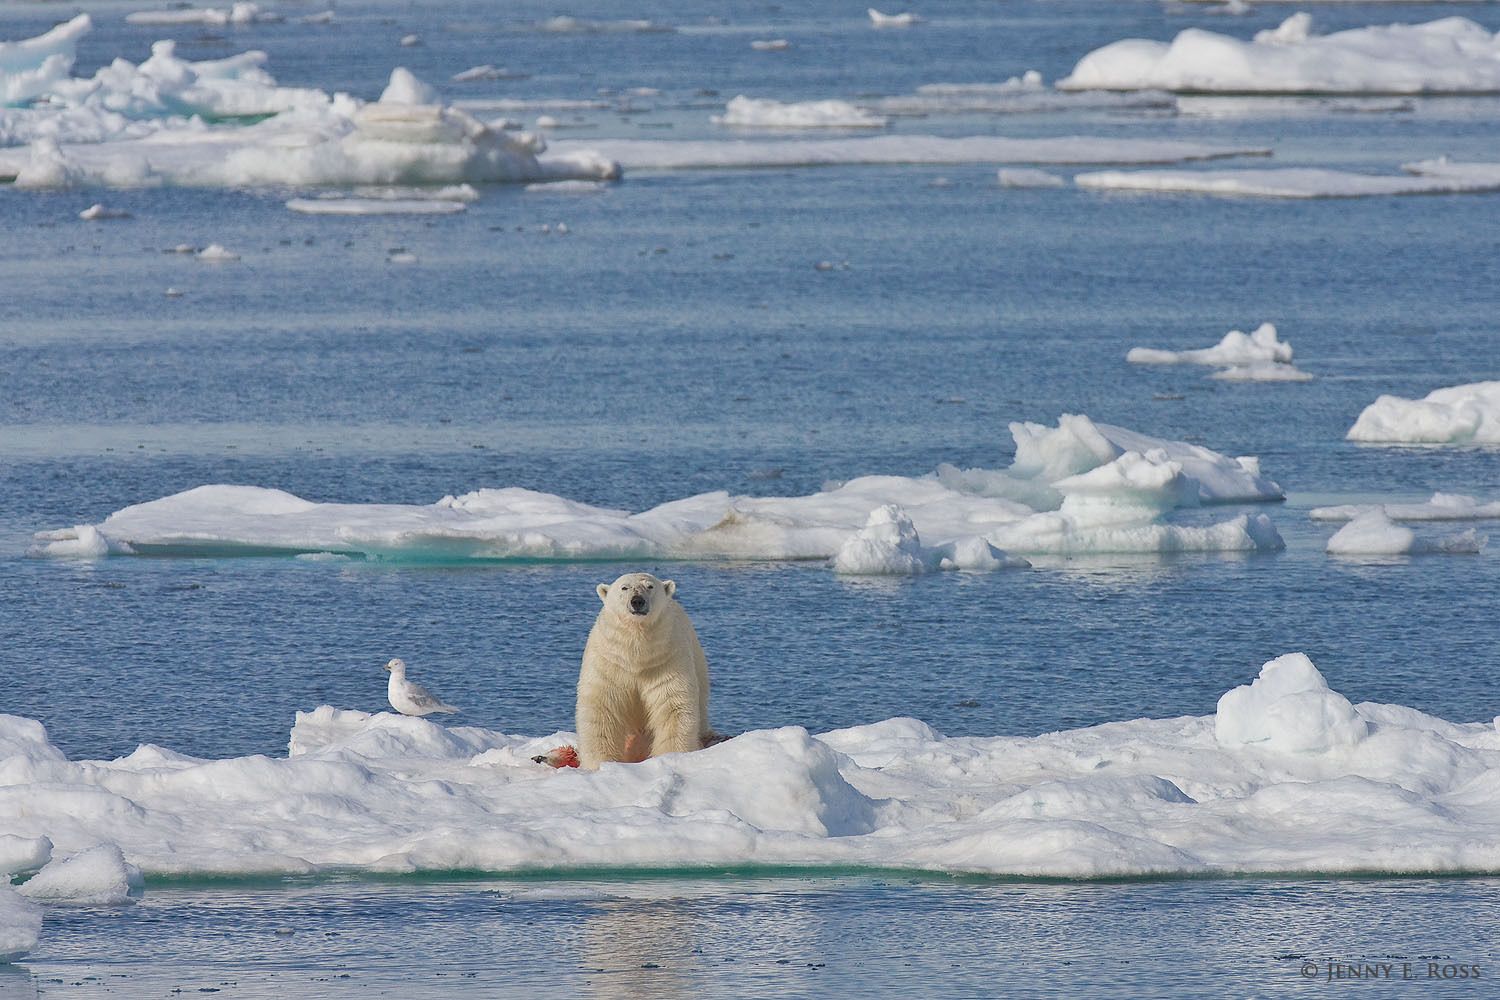 Polar bear infanticide and cannibalism on sea ice, Barents Sea, Svalbard Archipelgo, Norway.